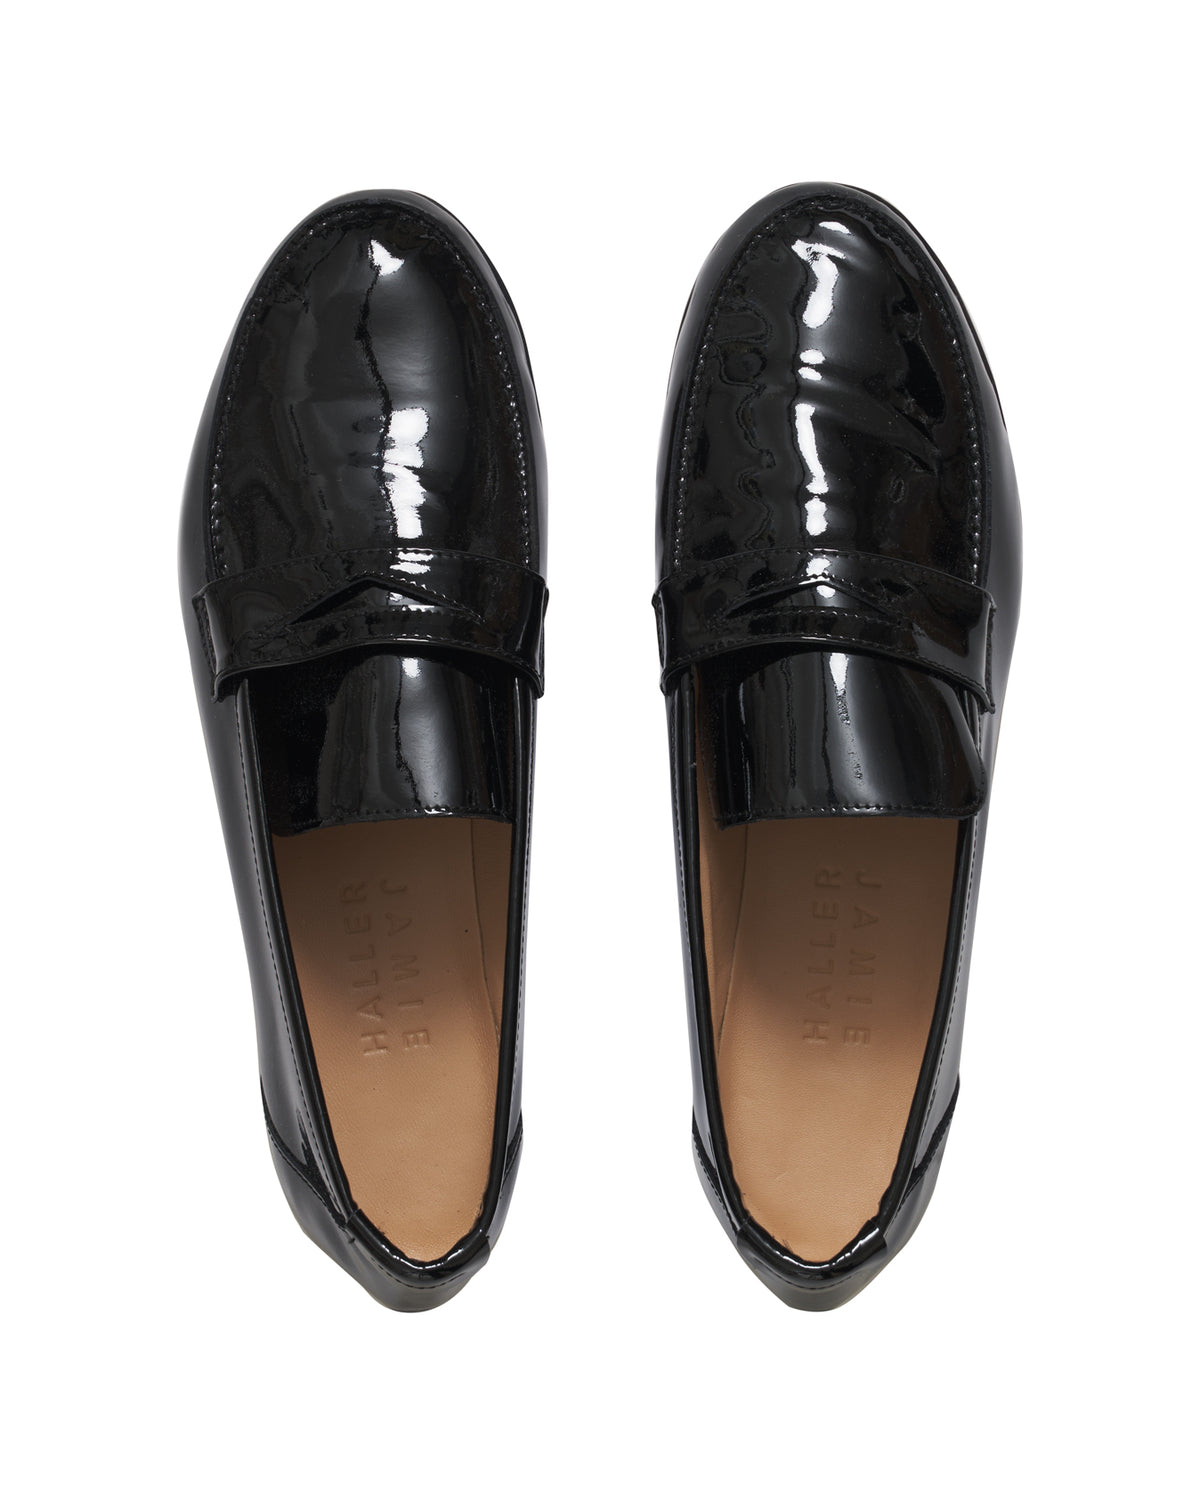 The Penny Loafer - Patent Black